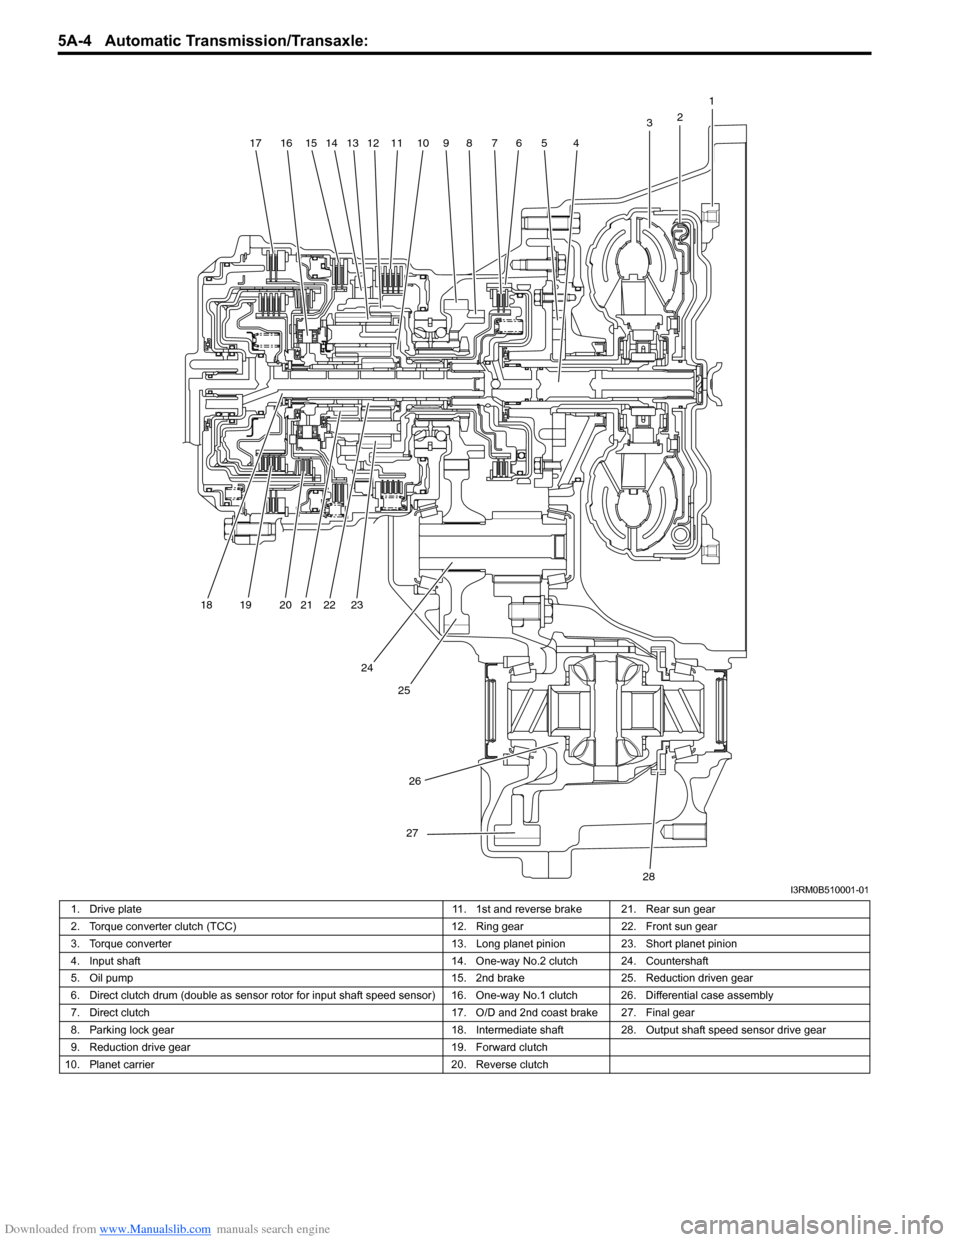 SUZUKI SWIFT 2005 2.G Service Workshop Manual Downloaded from www.Manualslib.com manuals search engine 5A-4 Automatic Transmission/Transaxle: 
1
2
3
4567891011121314151617
18 19 20 21 22 23
24 25
26
27
28I3RM0B510001-01
1. Drive plate 11. 1st and